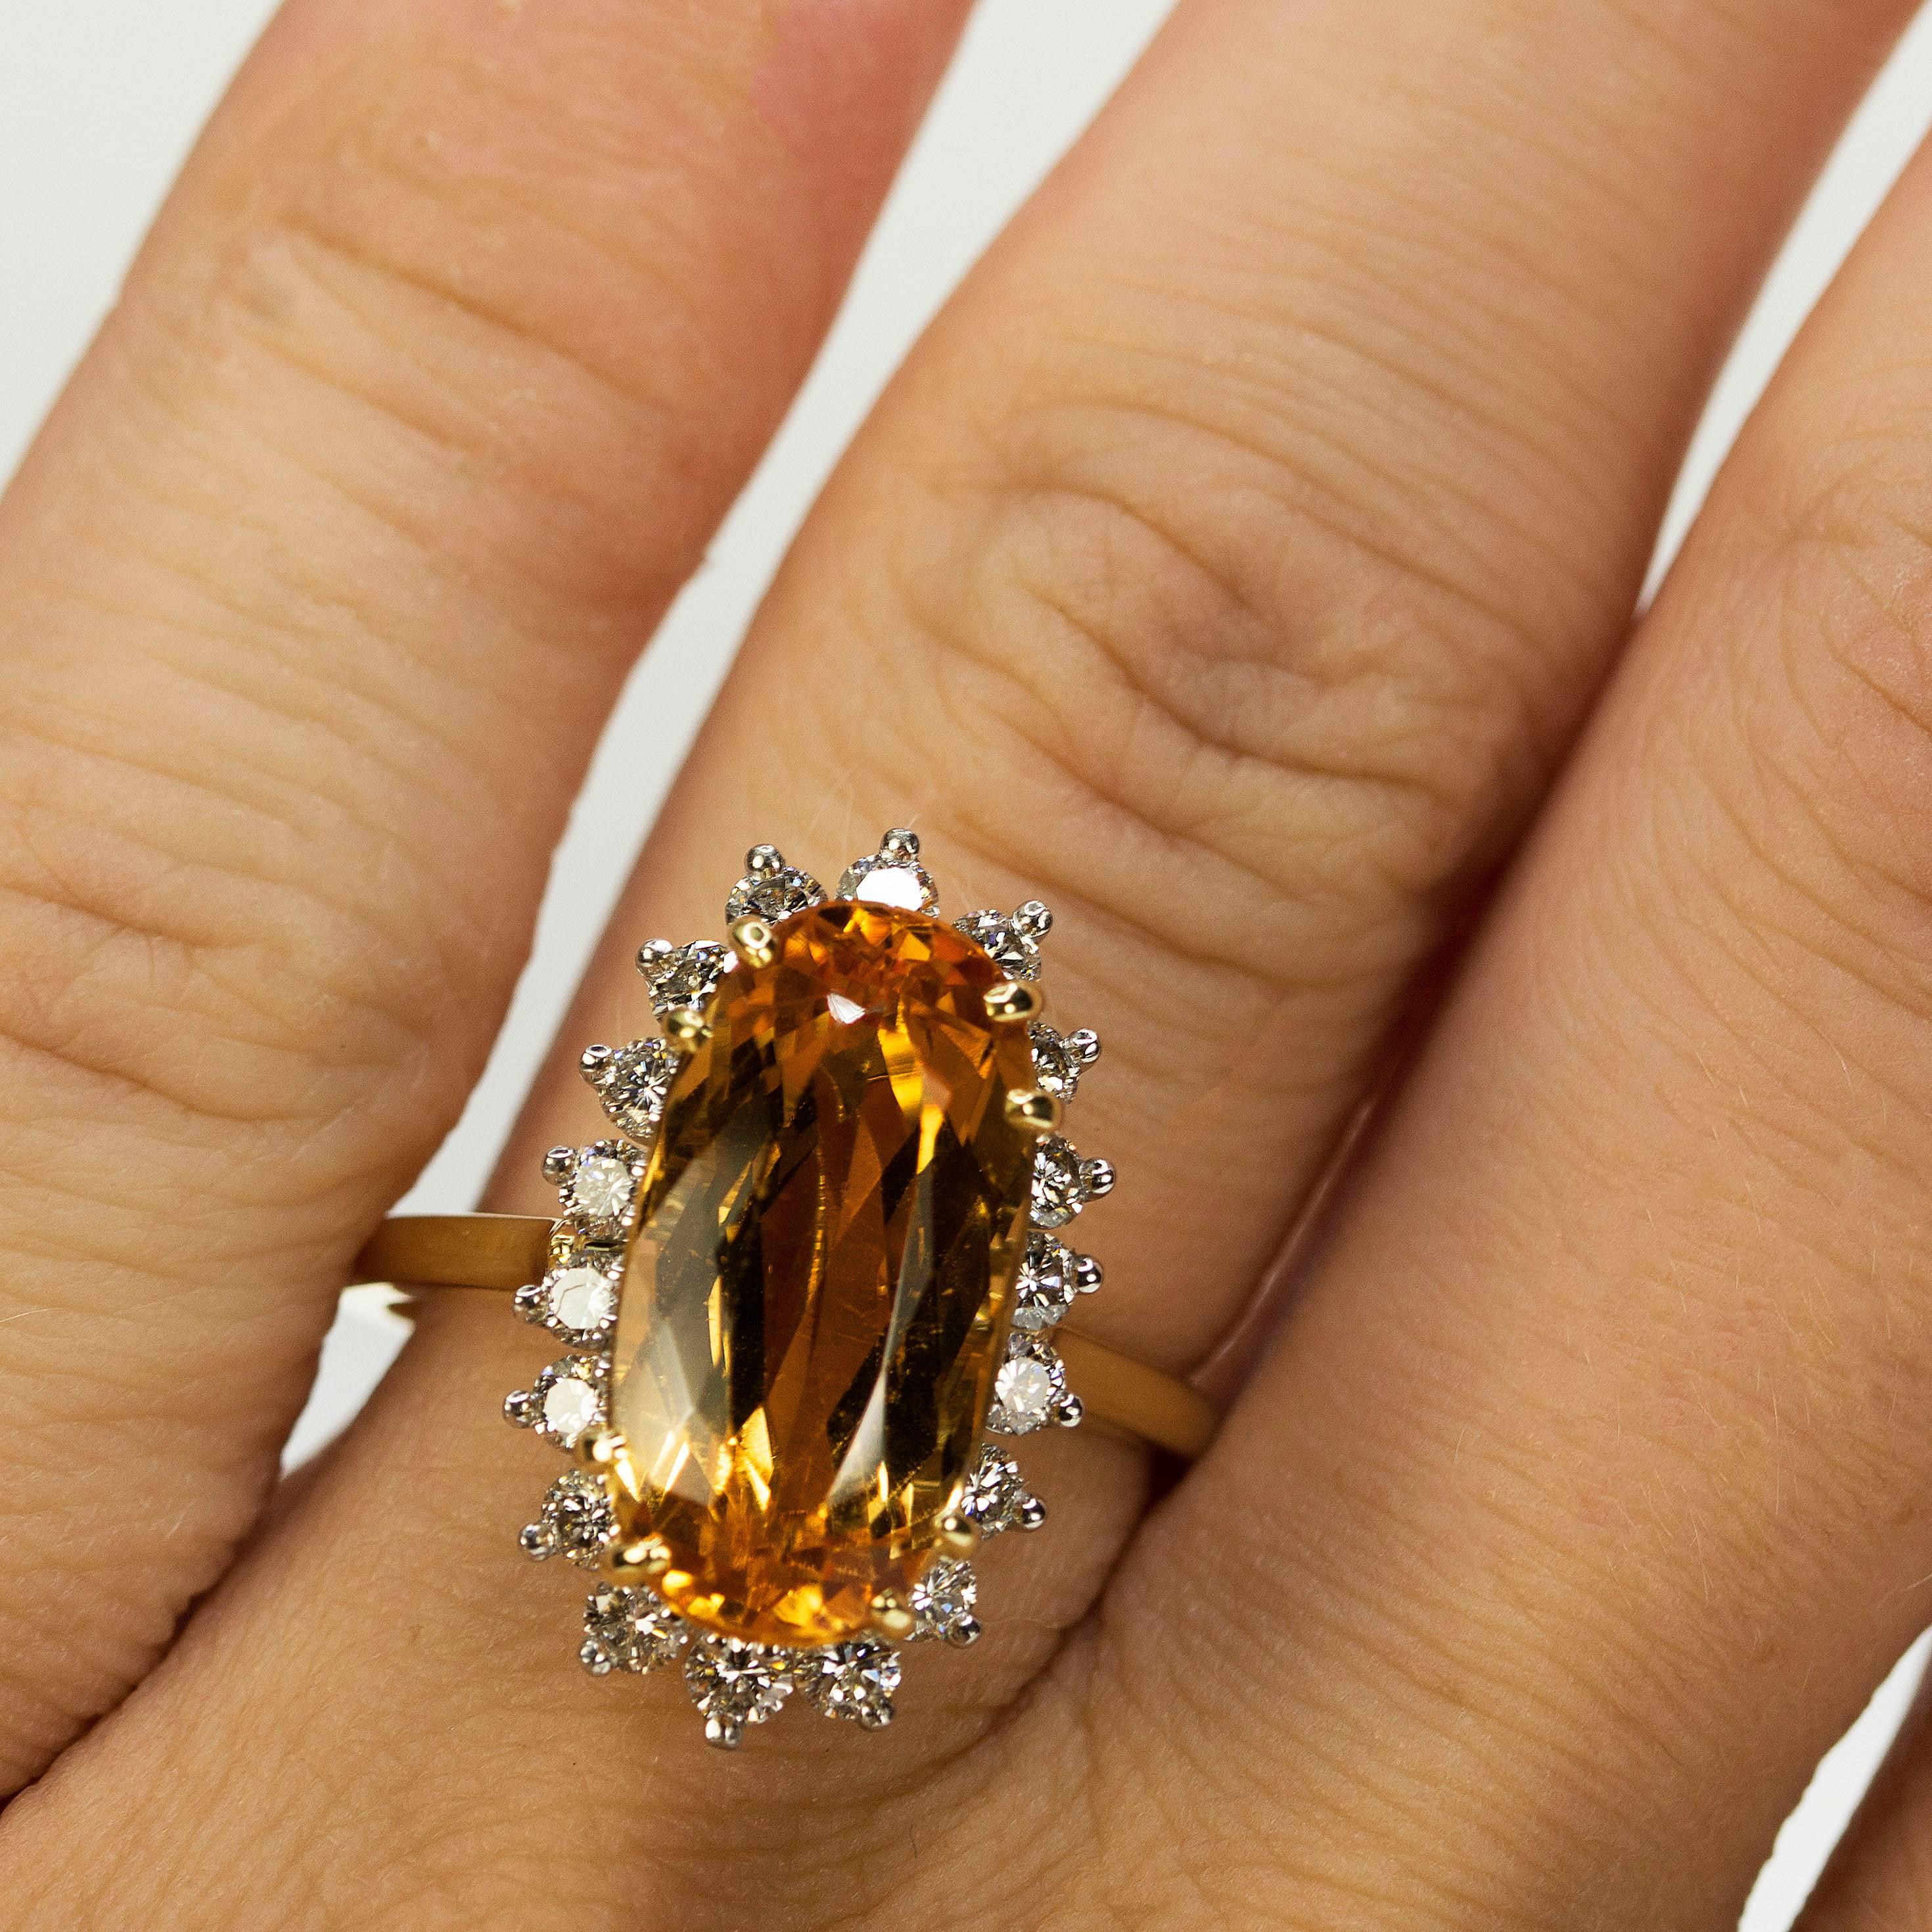 imperial topaz rings for sale